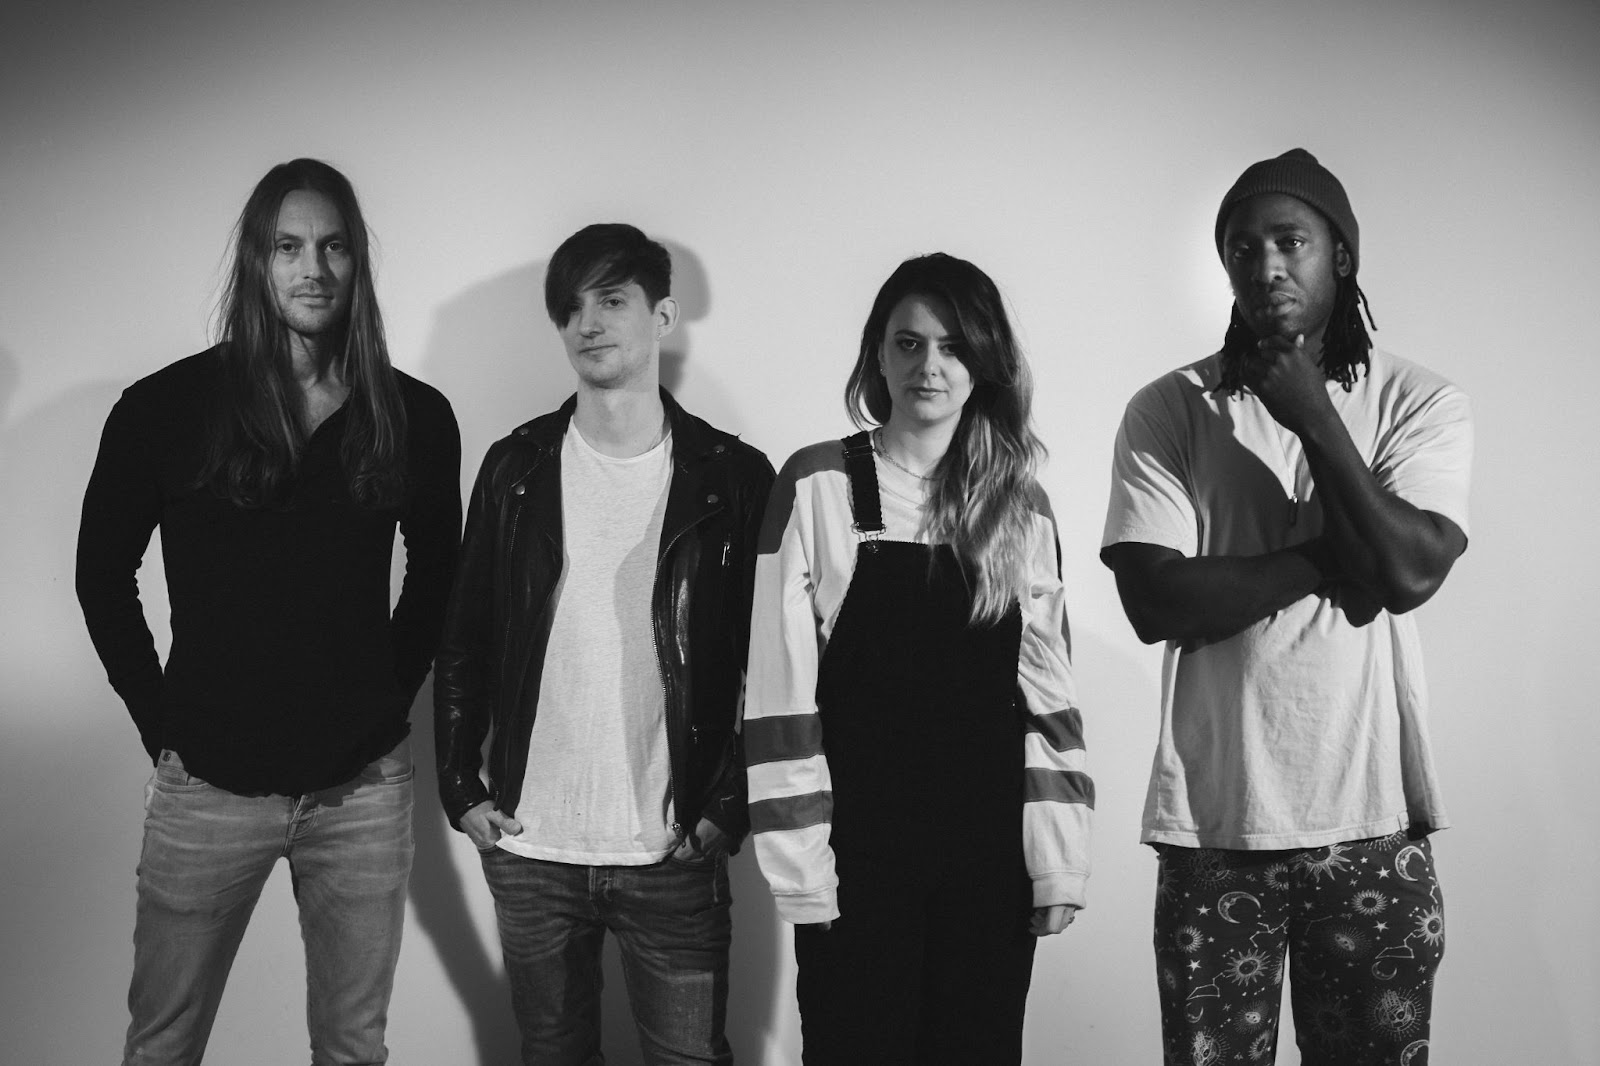 NEWS: Bloc Party return with new single 'Traps' and share UK tour dates